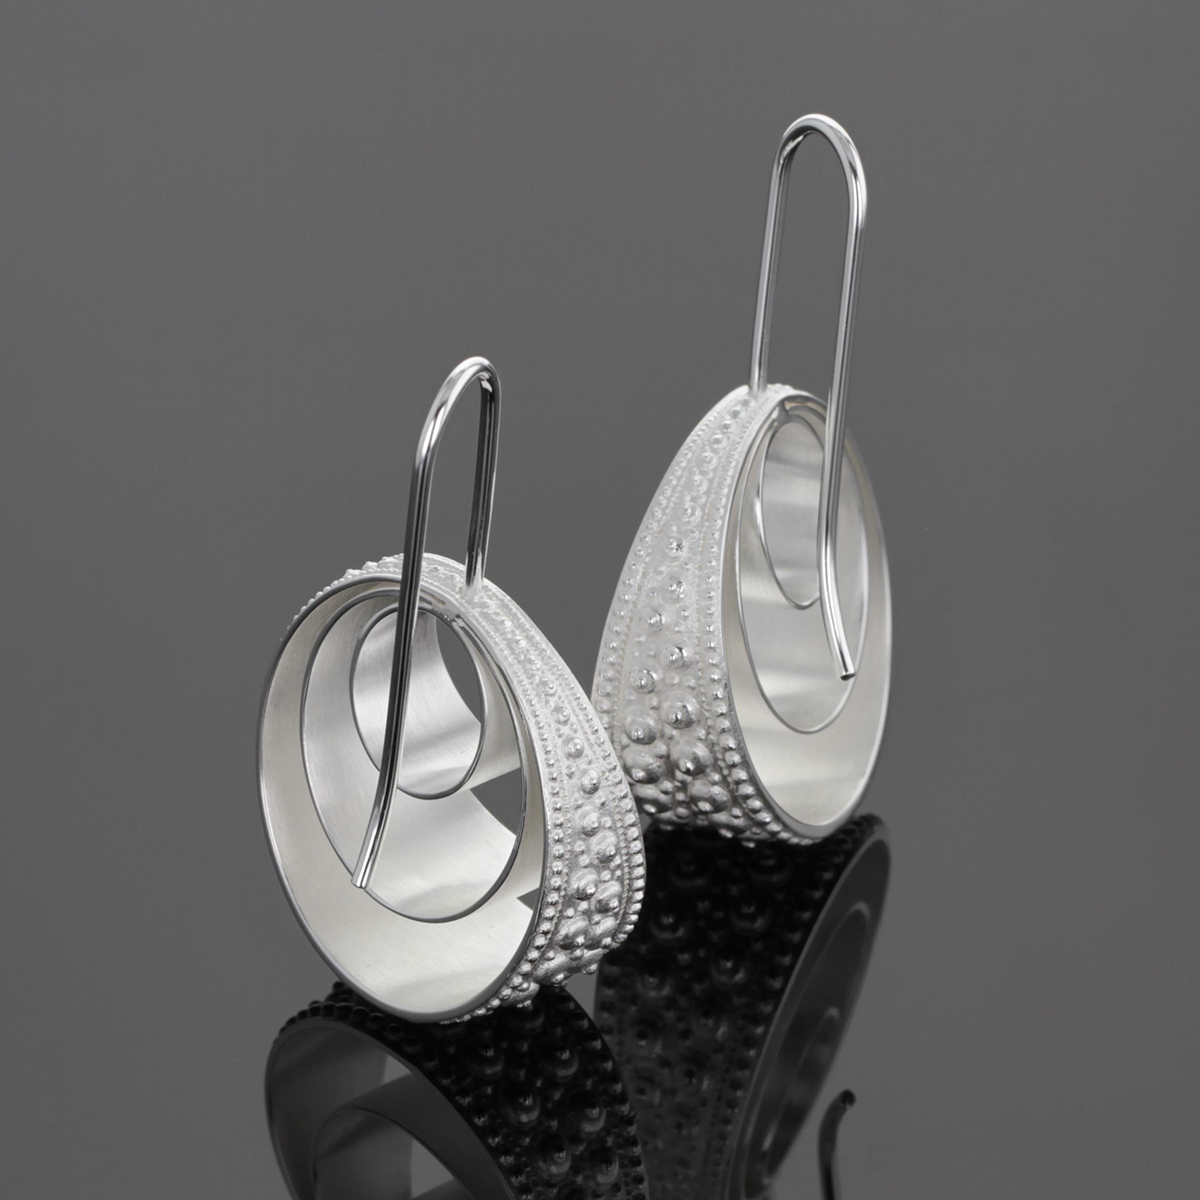 Hook earrings in silver with three hoops within each other